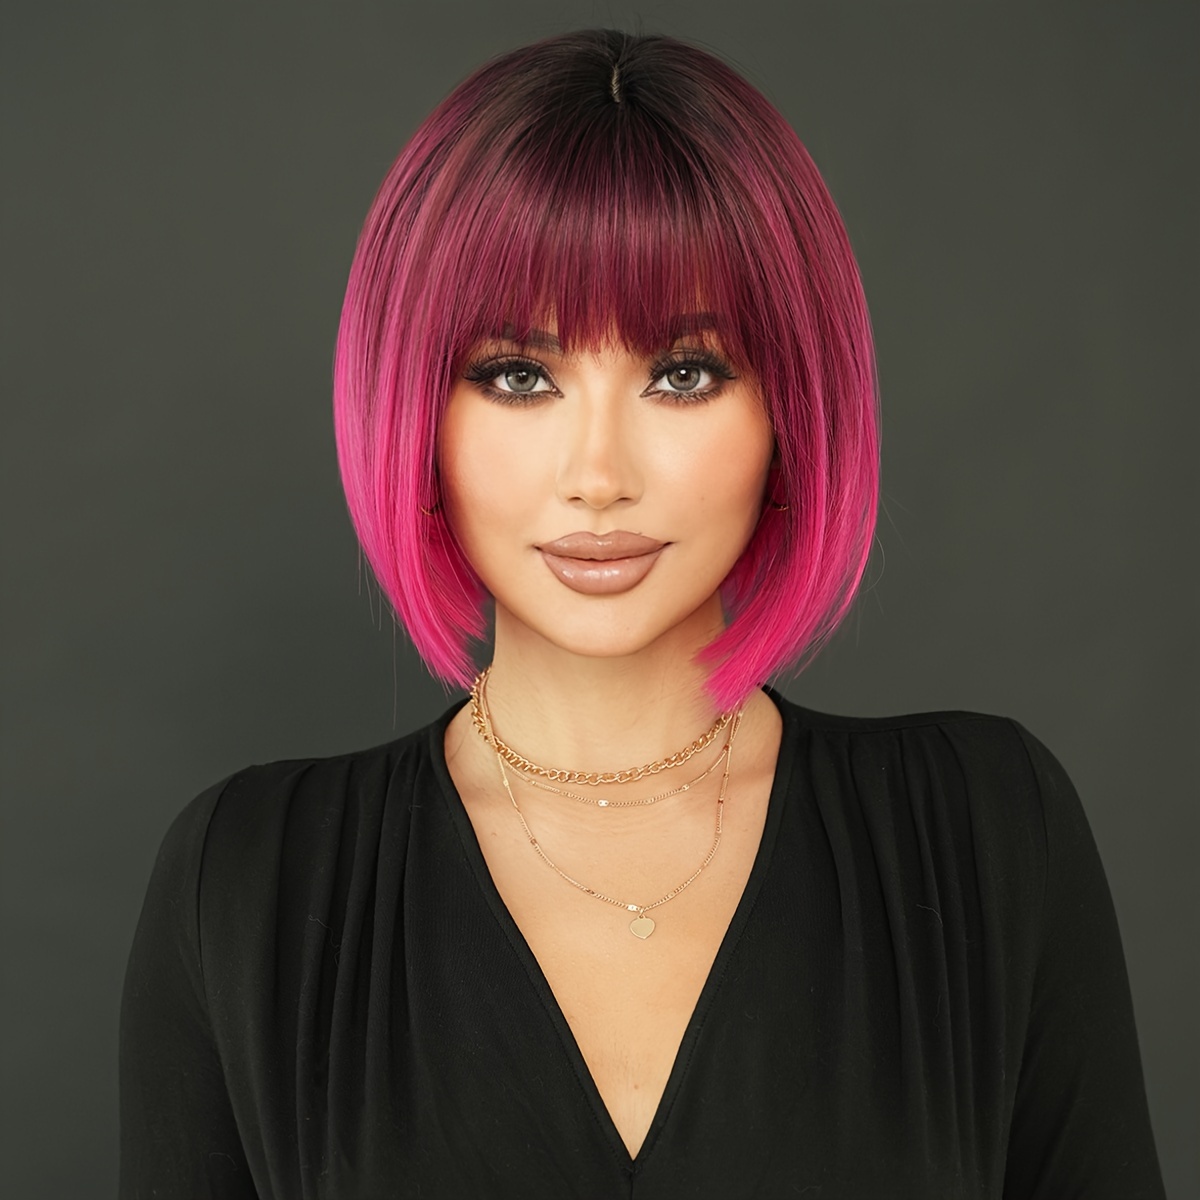 

Bob Cut Wig With Bangs Short Straight Wig Synthetic Wig Beginners Friendly Heat Resistant Wig For Women